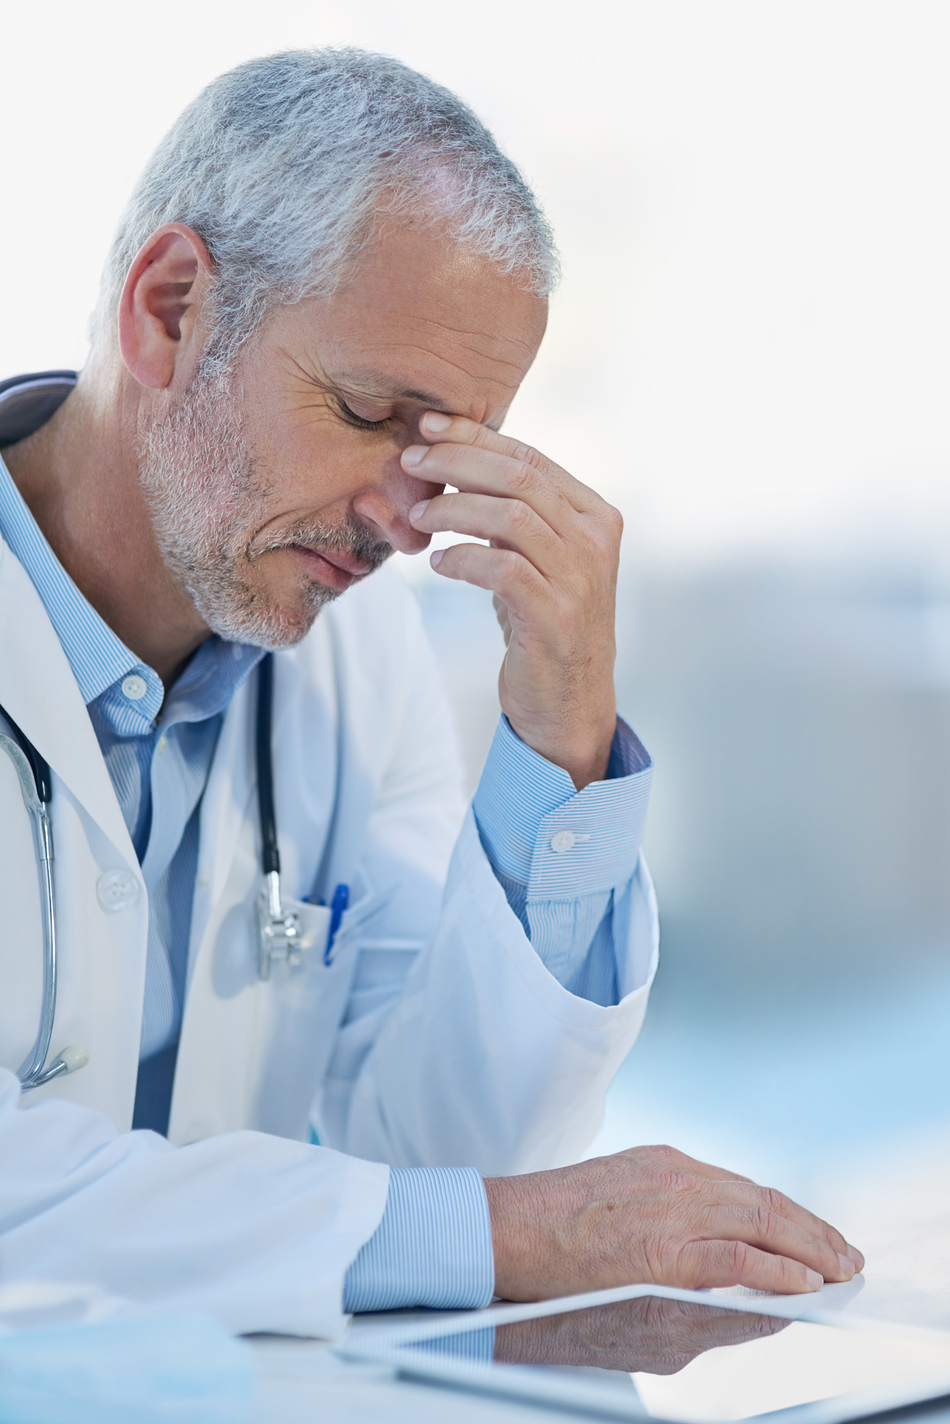 Coping with Physician Burnout